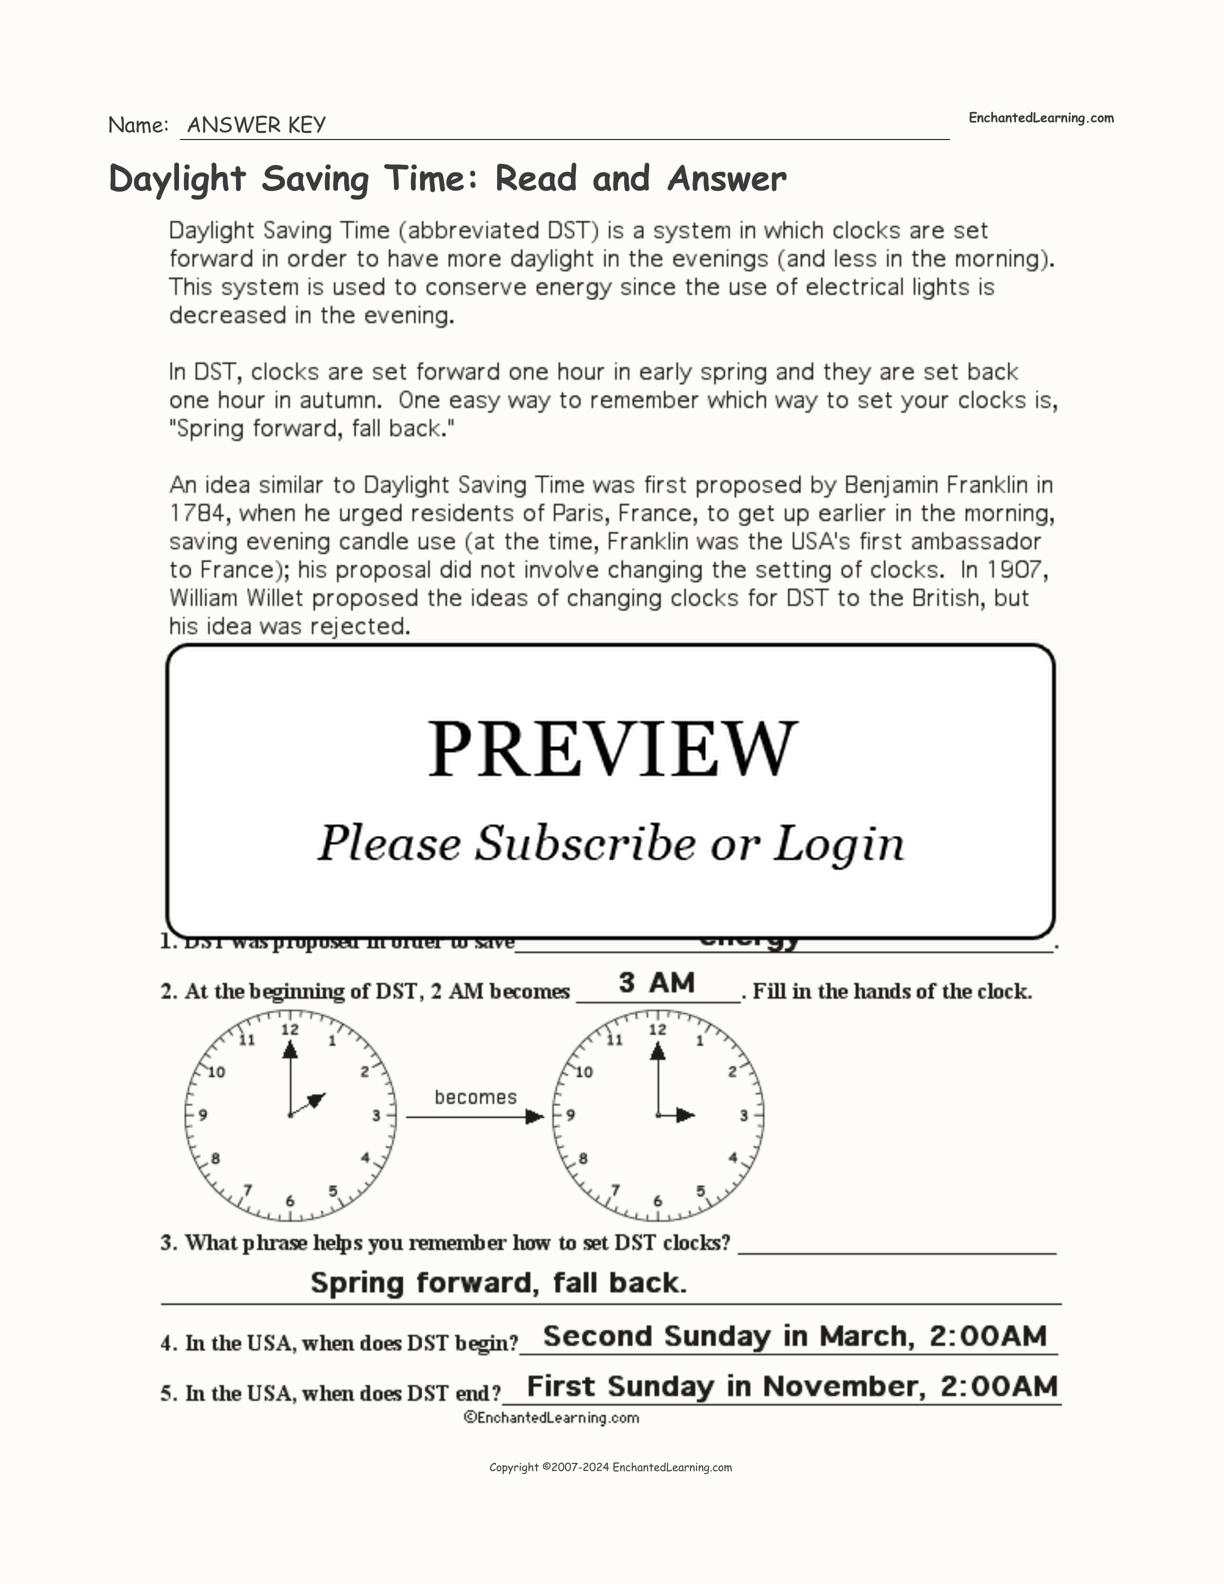 Daylight Saving Time: Read and Answer interactive worksheet page 2